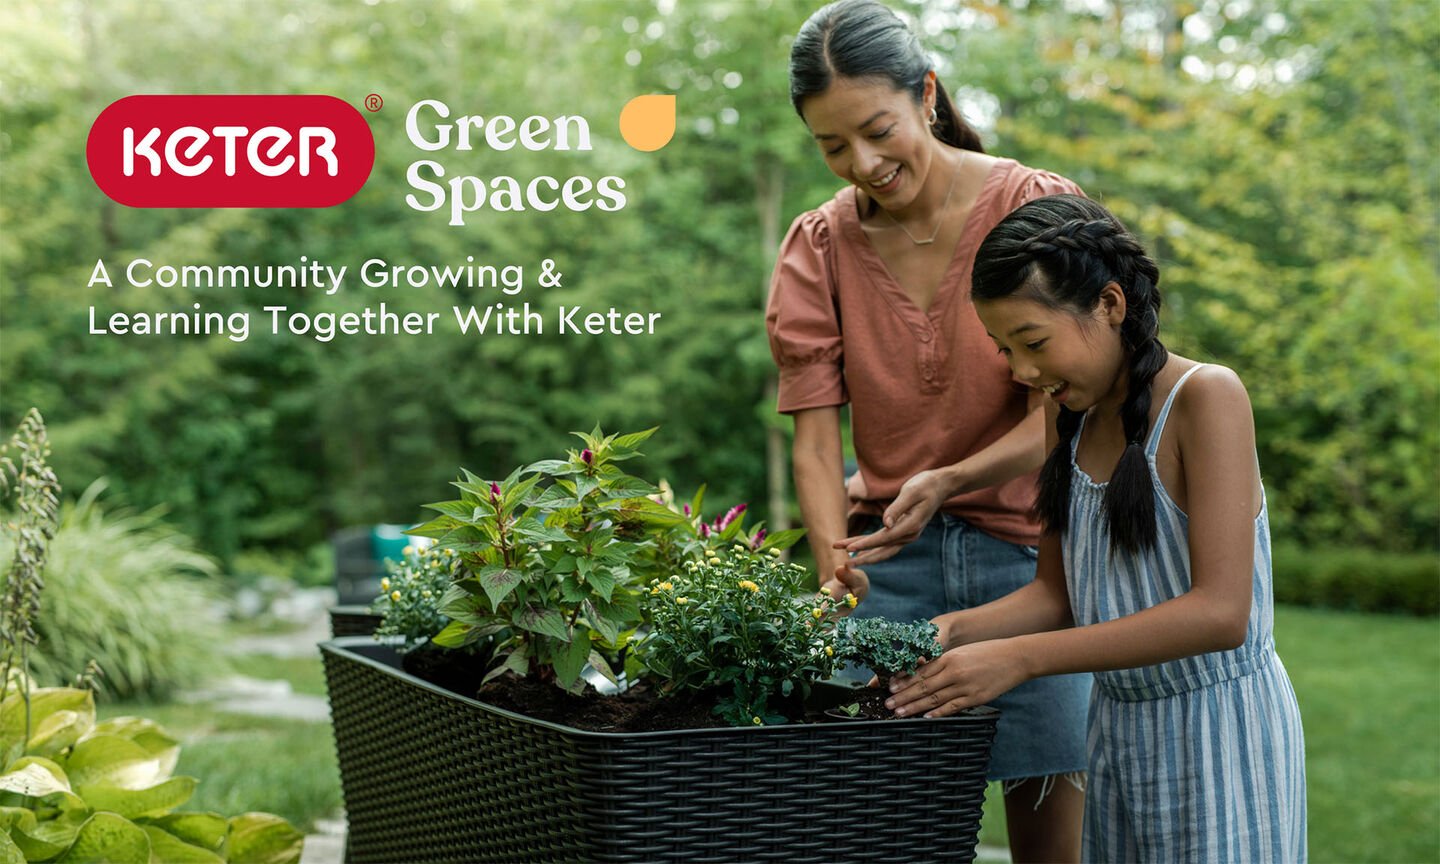 Keter Green Spaces: A Community Growing & Learning Together with Keter